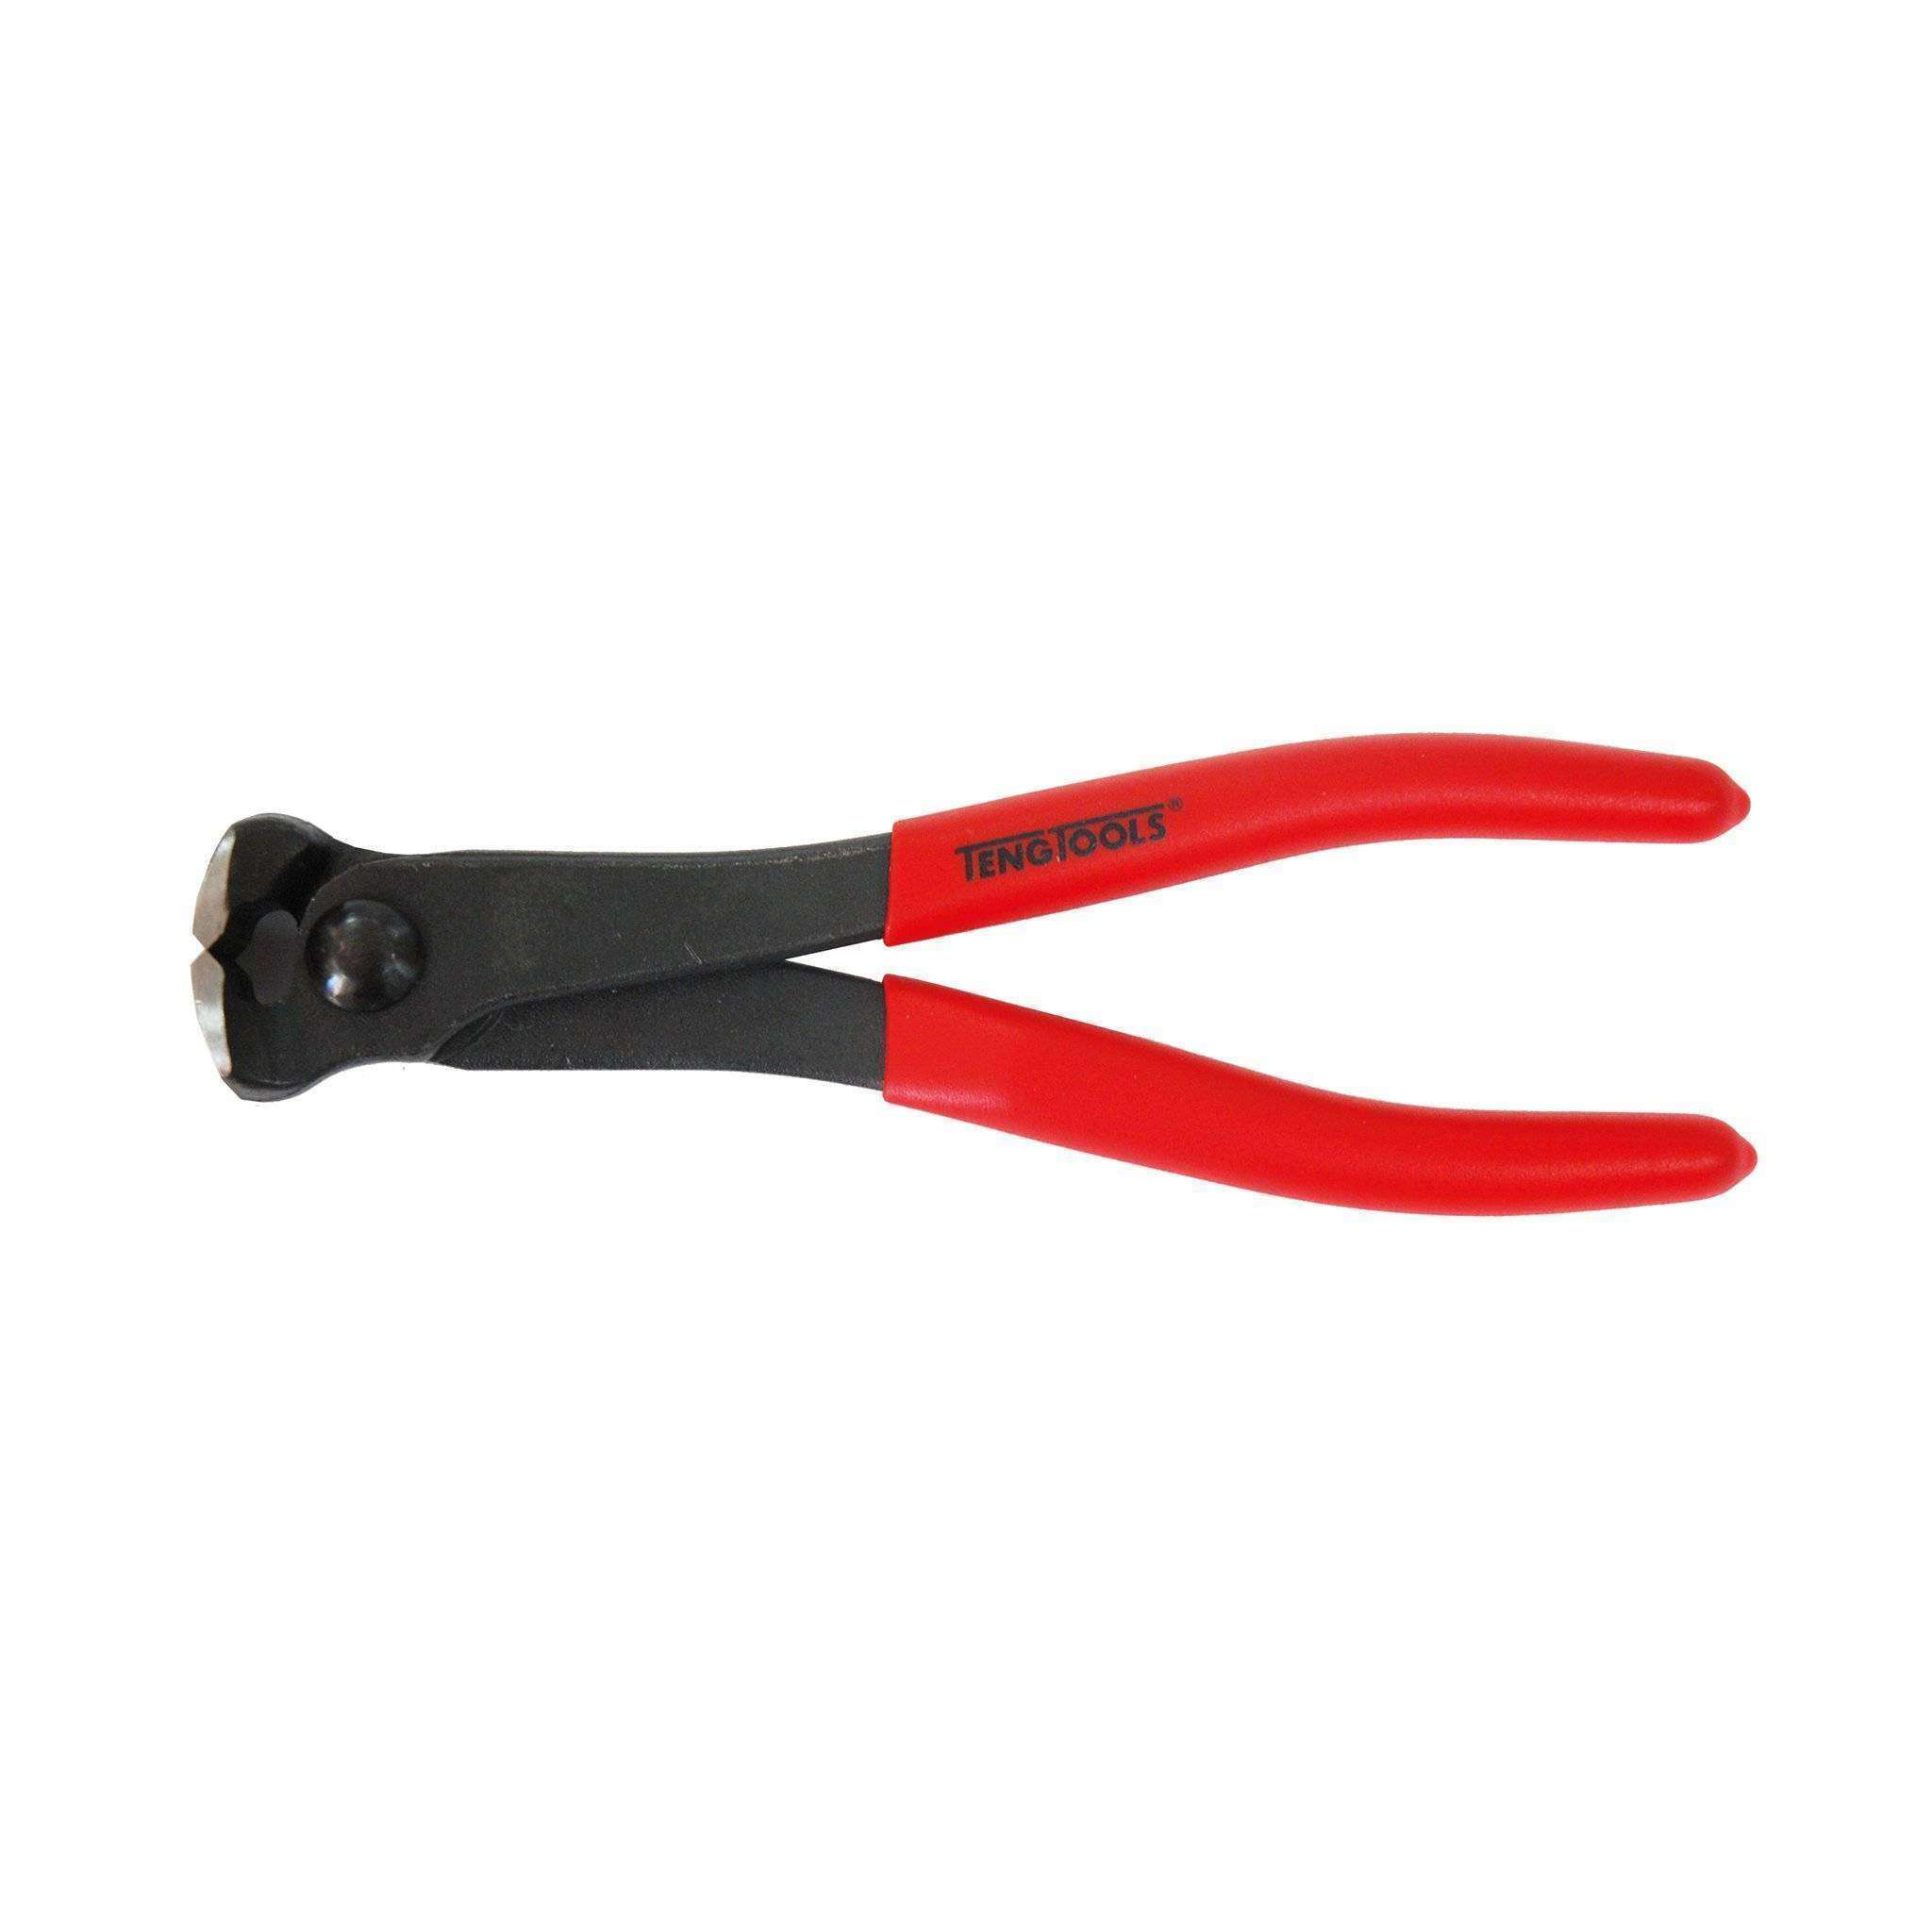 Teng Tools - 6 inch Higher Leverage End Nippers - MB448-6